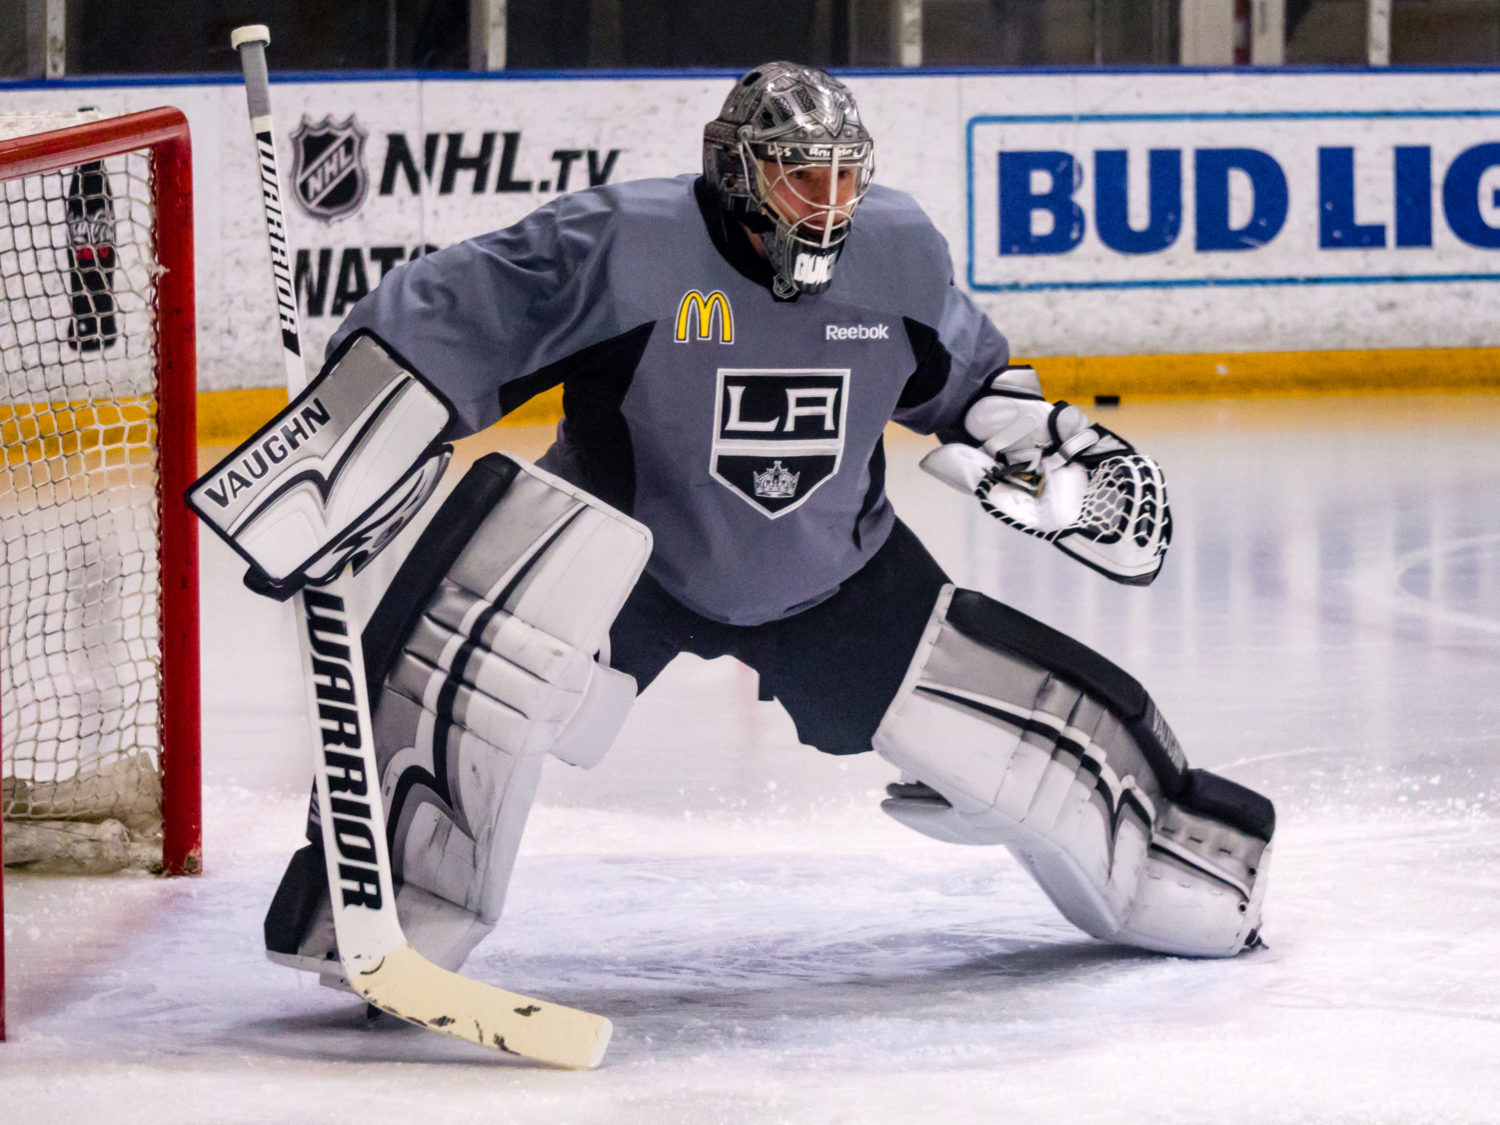 NHL Network - In his 500th game, Jonathan Quick earned